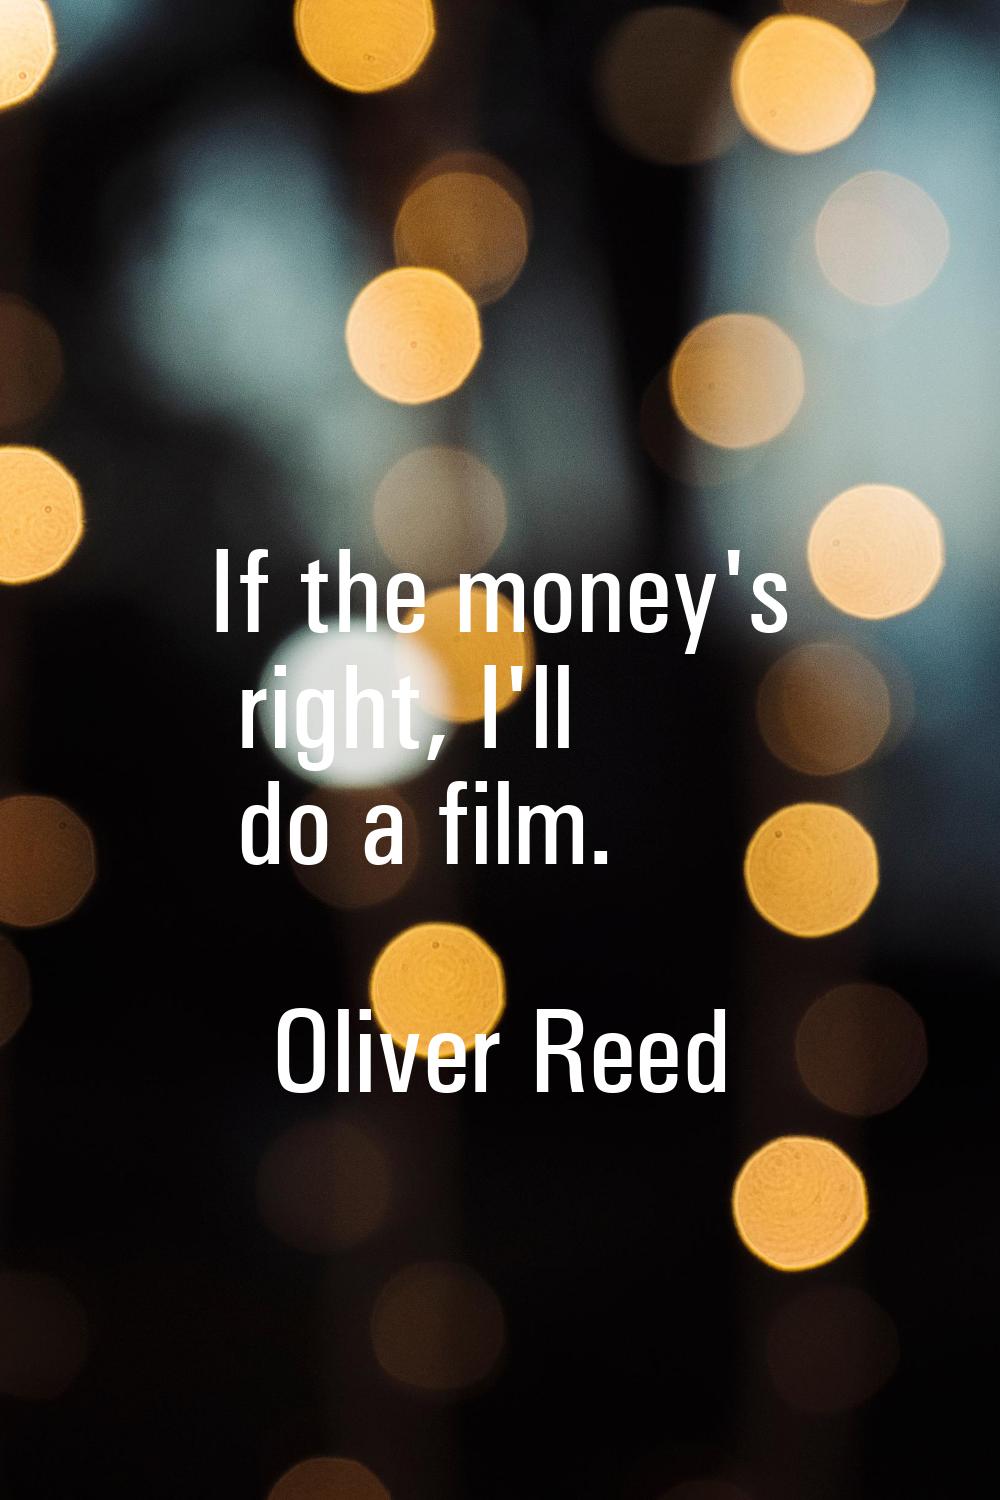 If the money's right, I'll do a film.